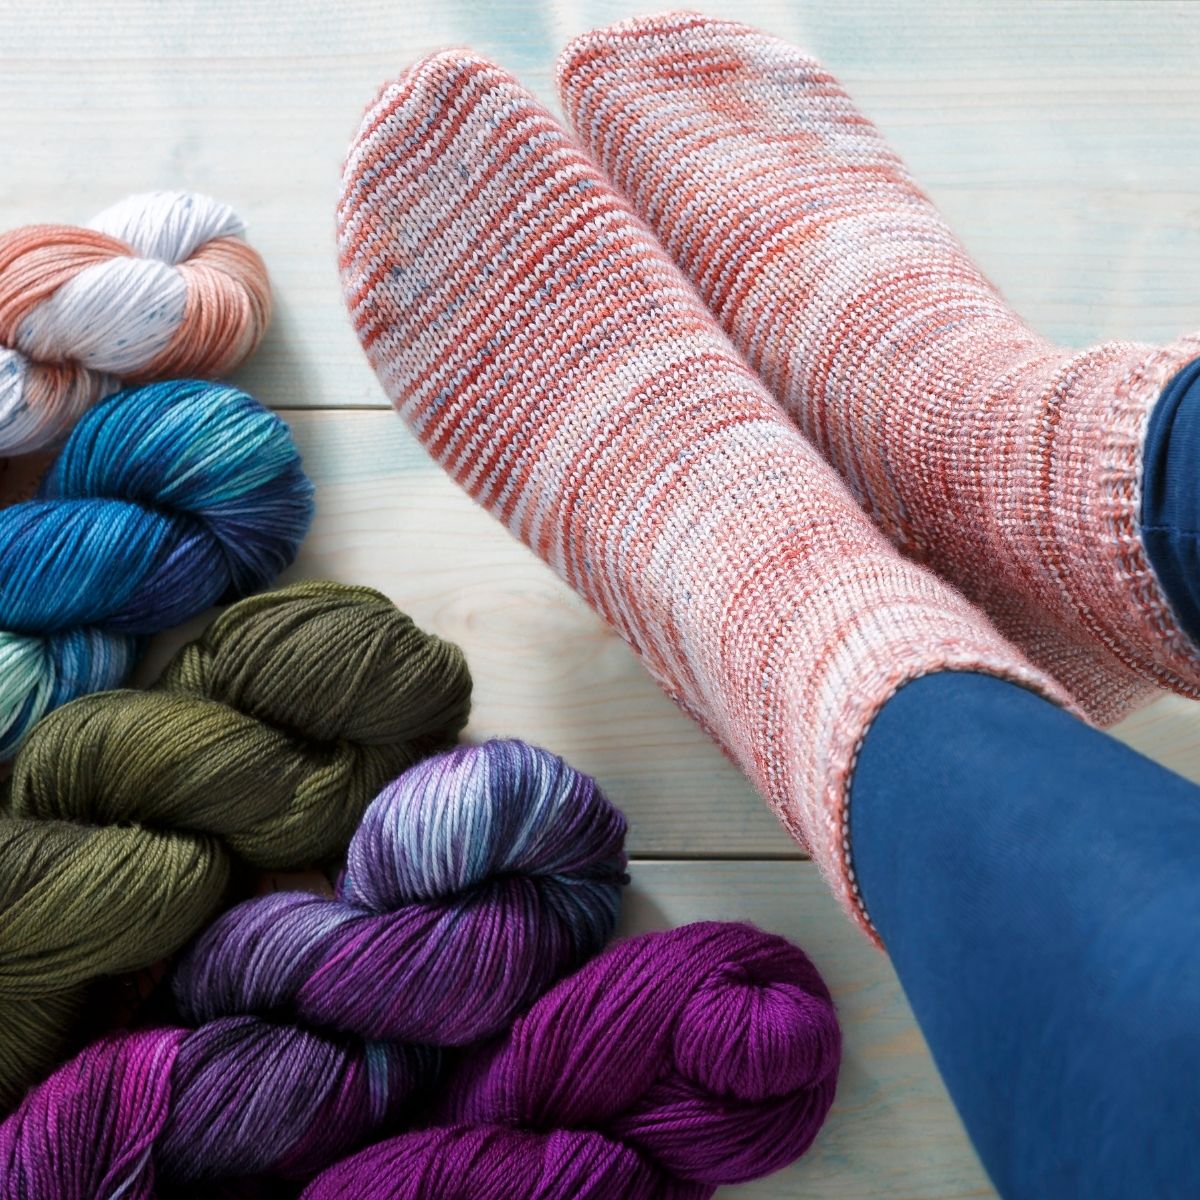 A woman's feet  are pictured, wearing hand knit socks in Manos del Uruguay Alegria. The colorway of the socks is Colorado river, additional skeins of yarn are shown.